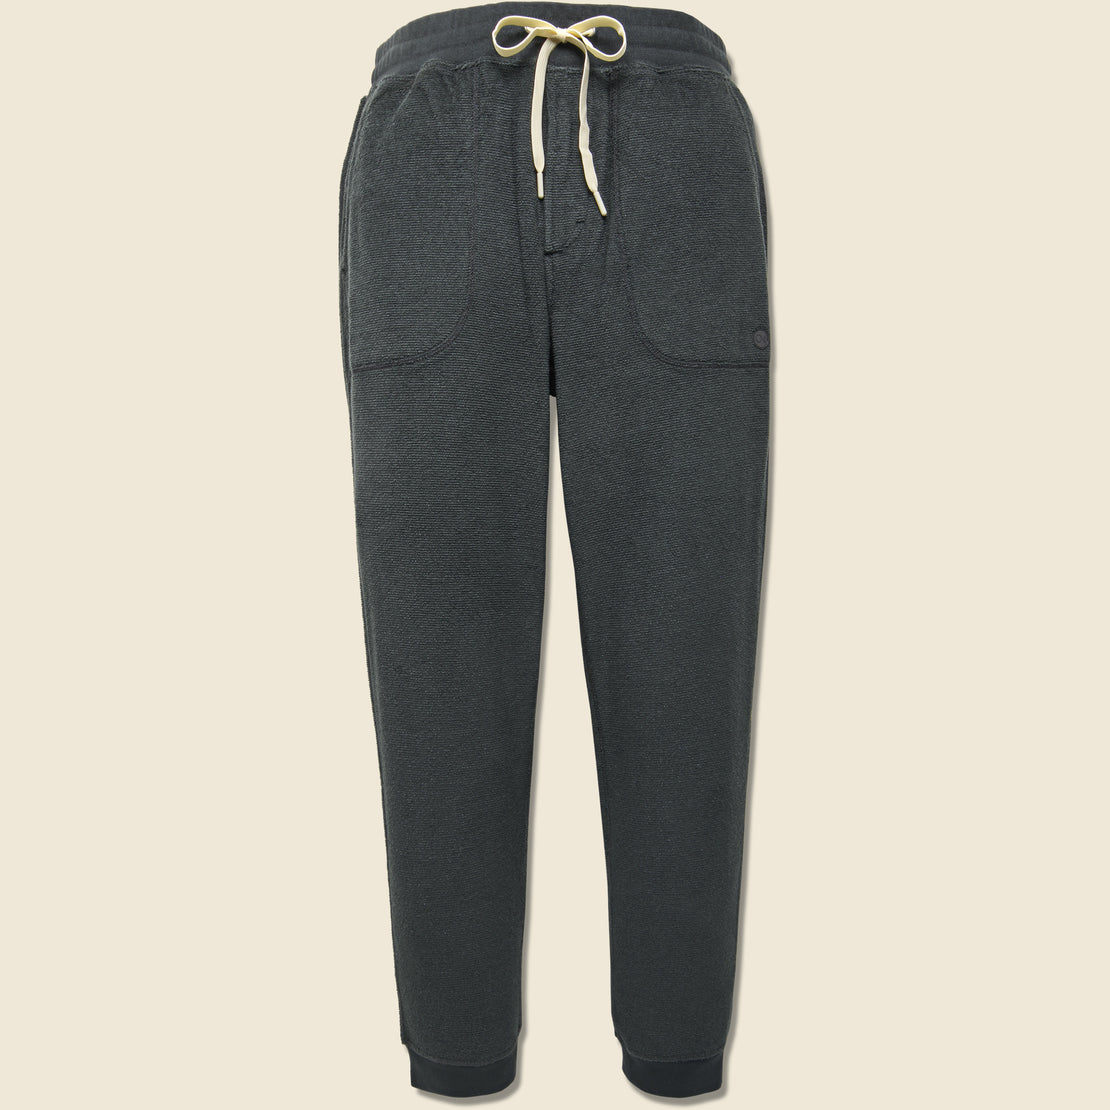 Outerknown Hightide Sweatpant - Pitch Black